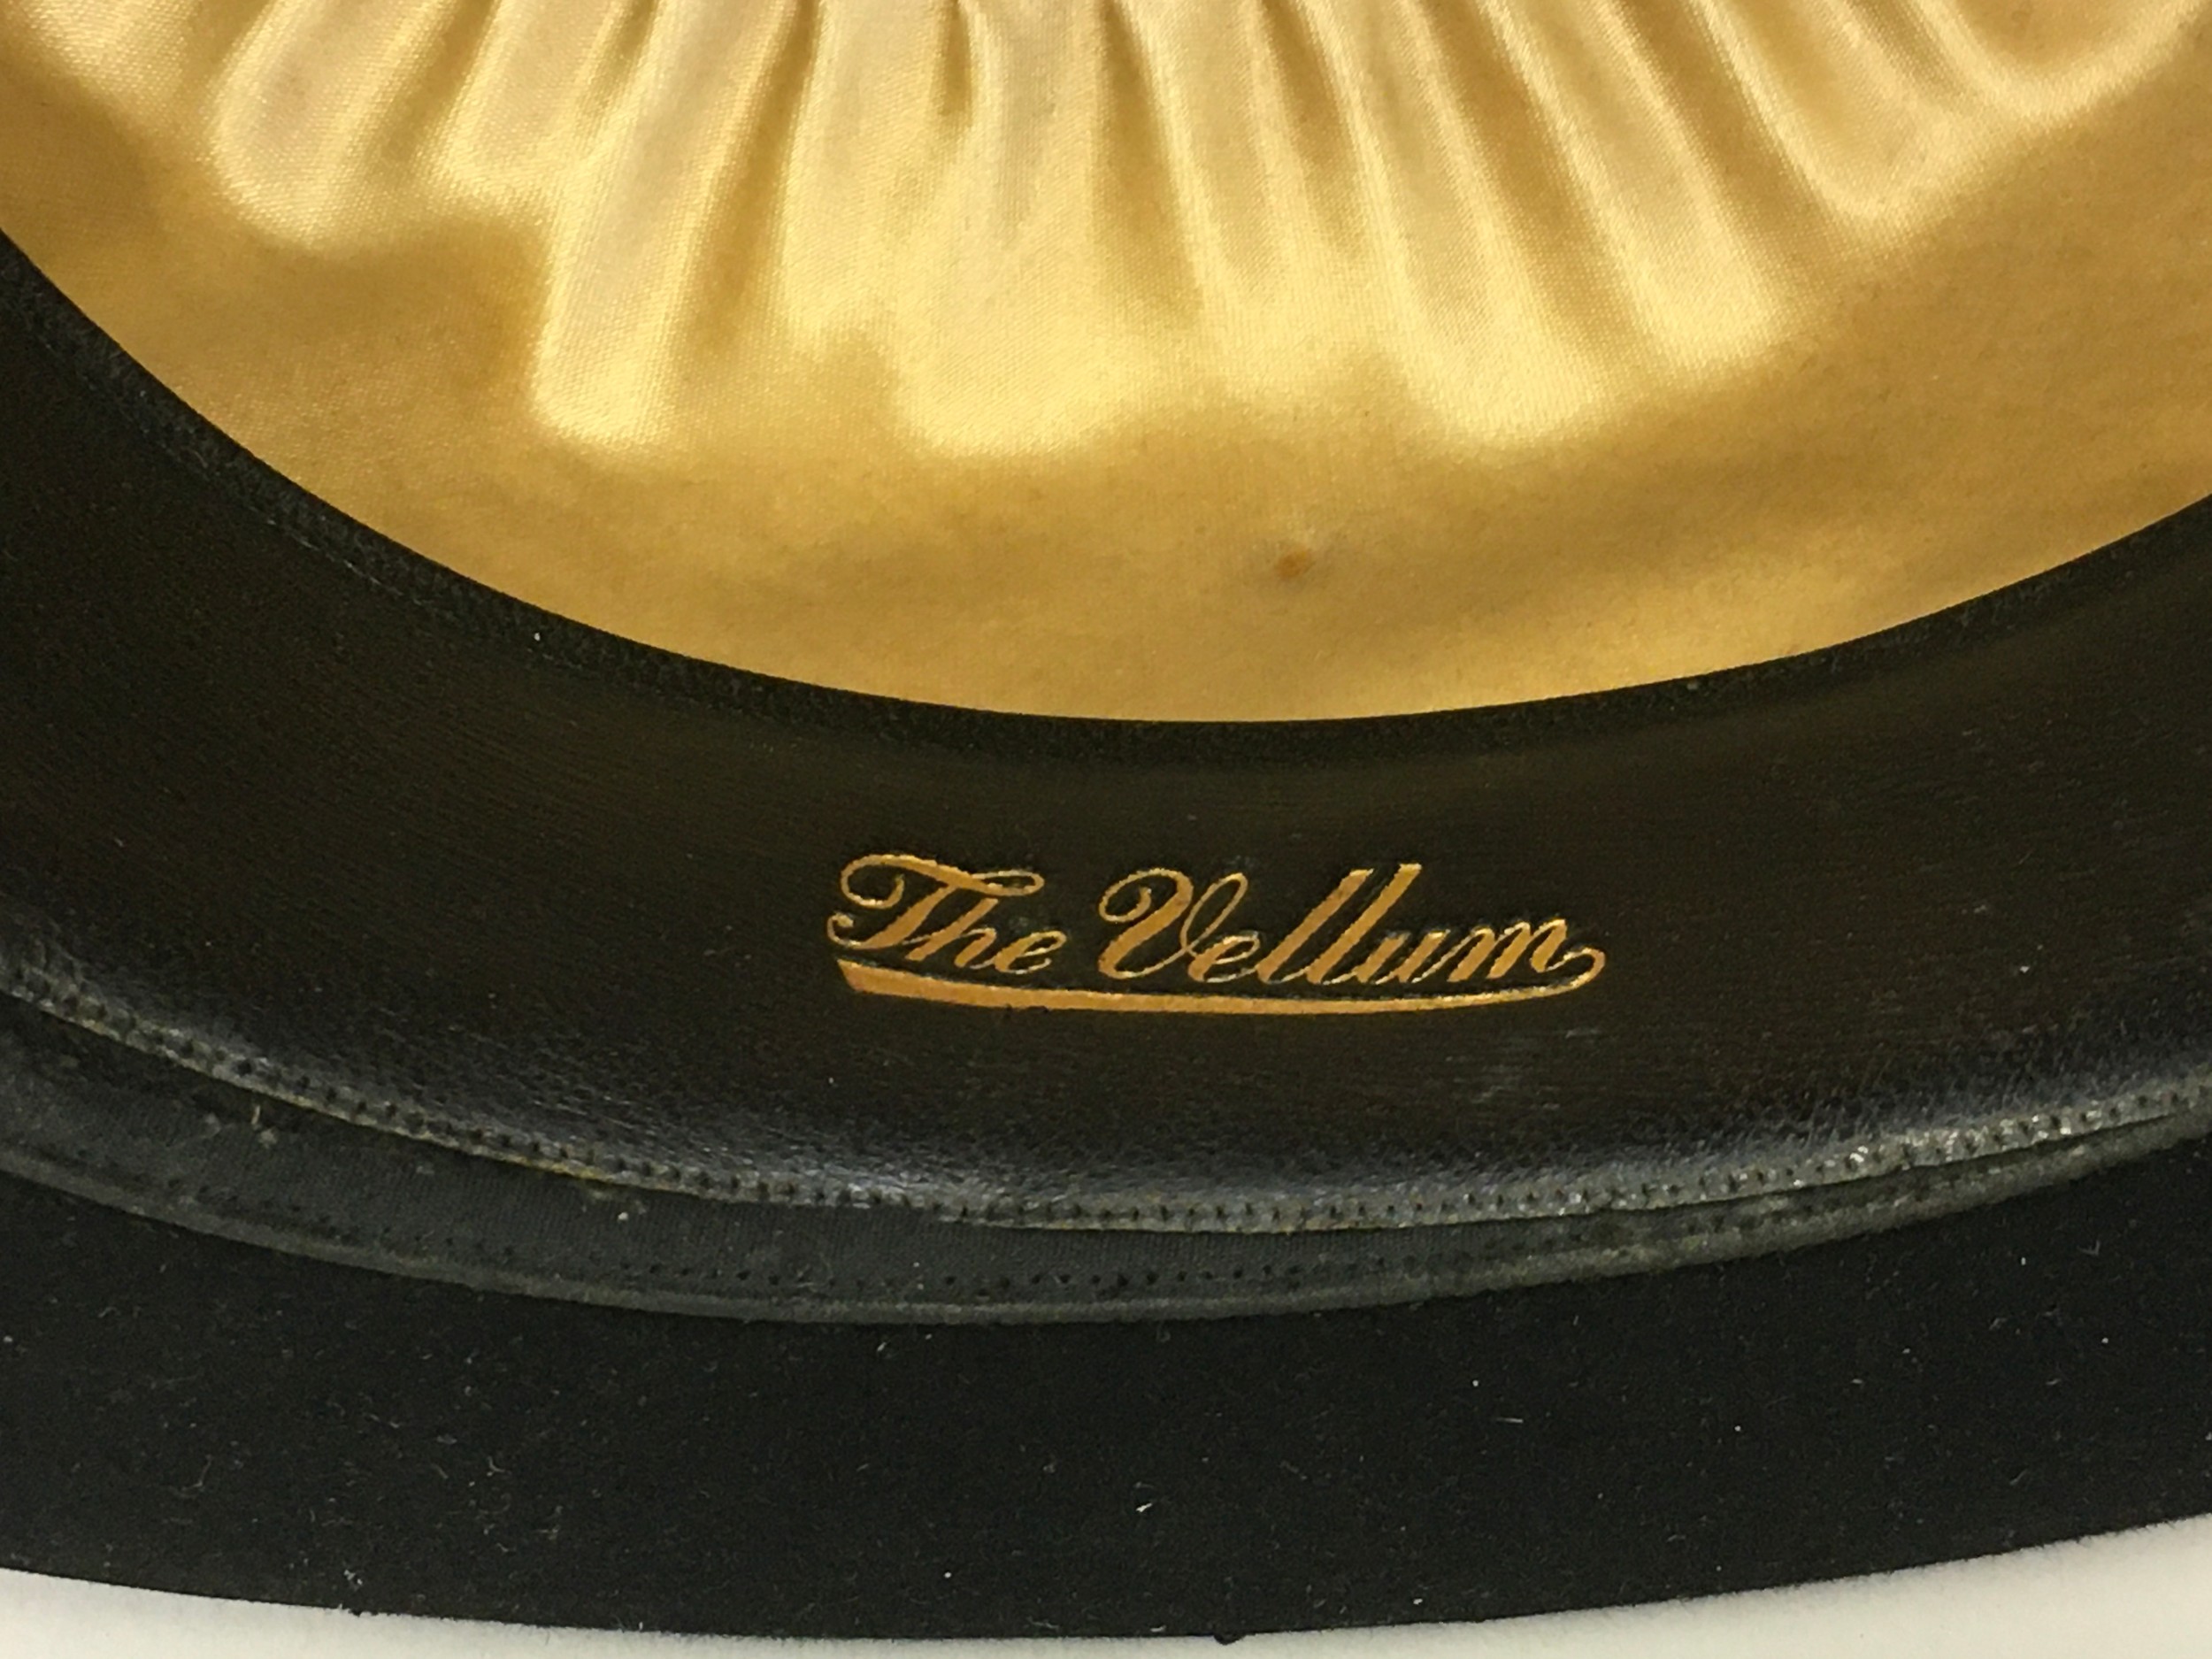 H.J. Whyatt "The Vellum" bowler hat with box marked "Moores, British Made". - Image 6 of 7